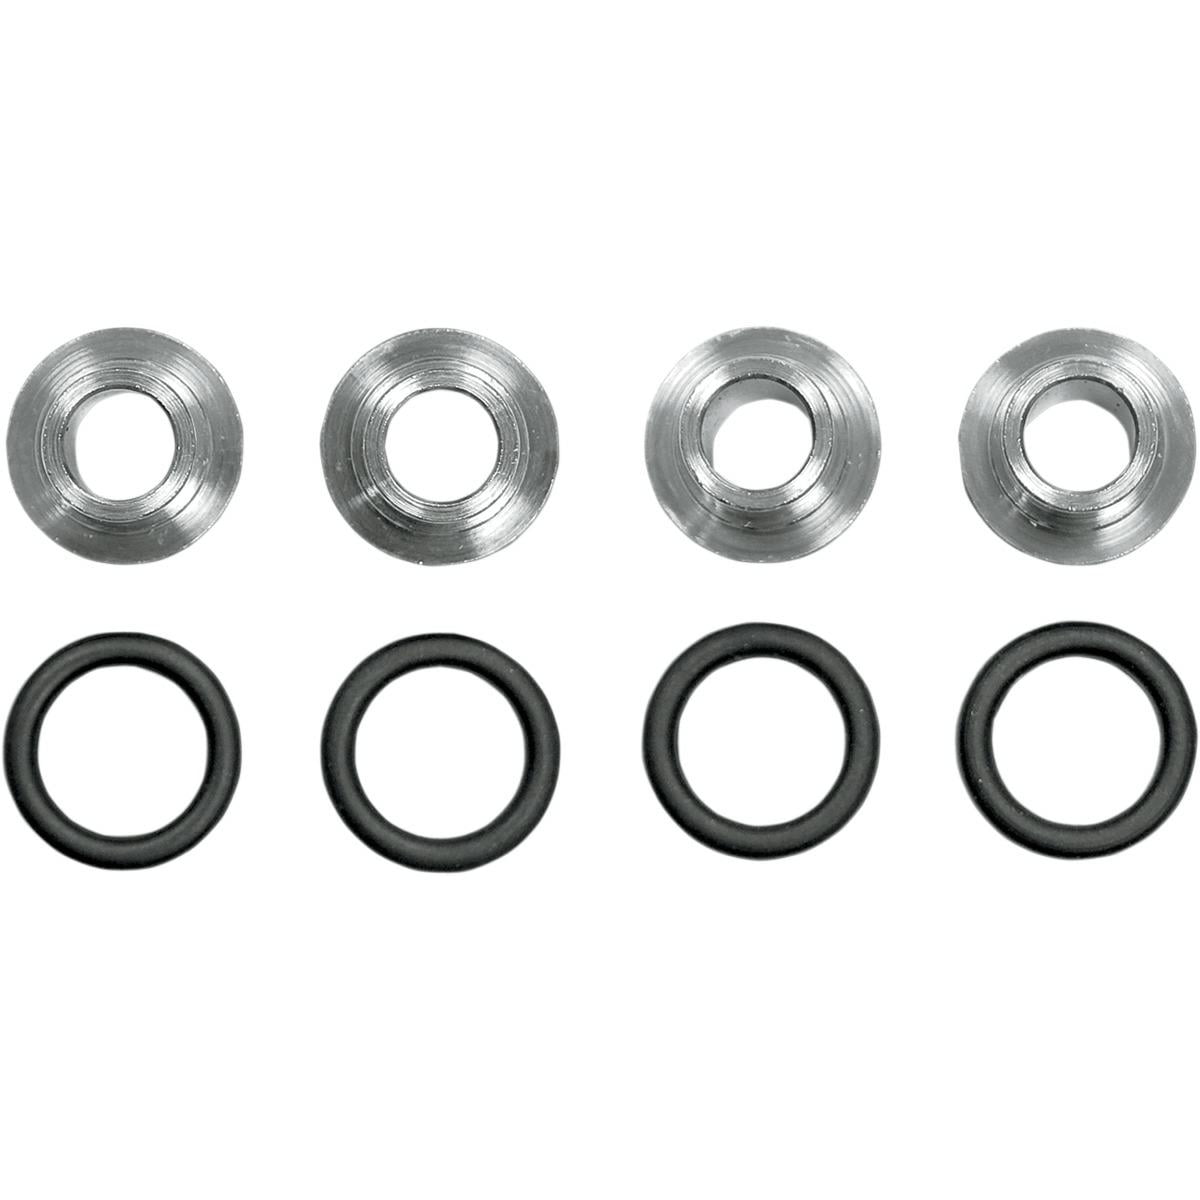 Thick Fender Washer Assortment 803 Pieces! Grade 8 Extra Thick Flat Washer 